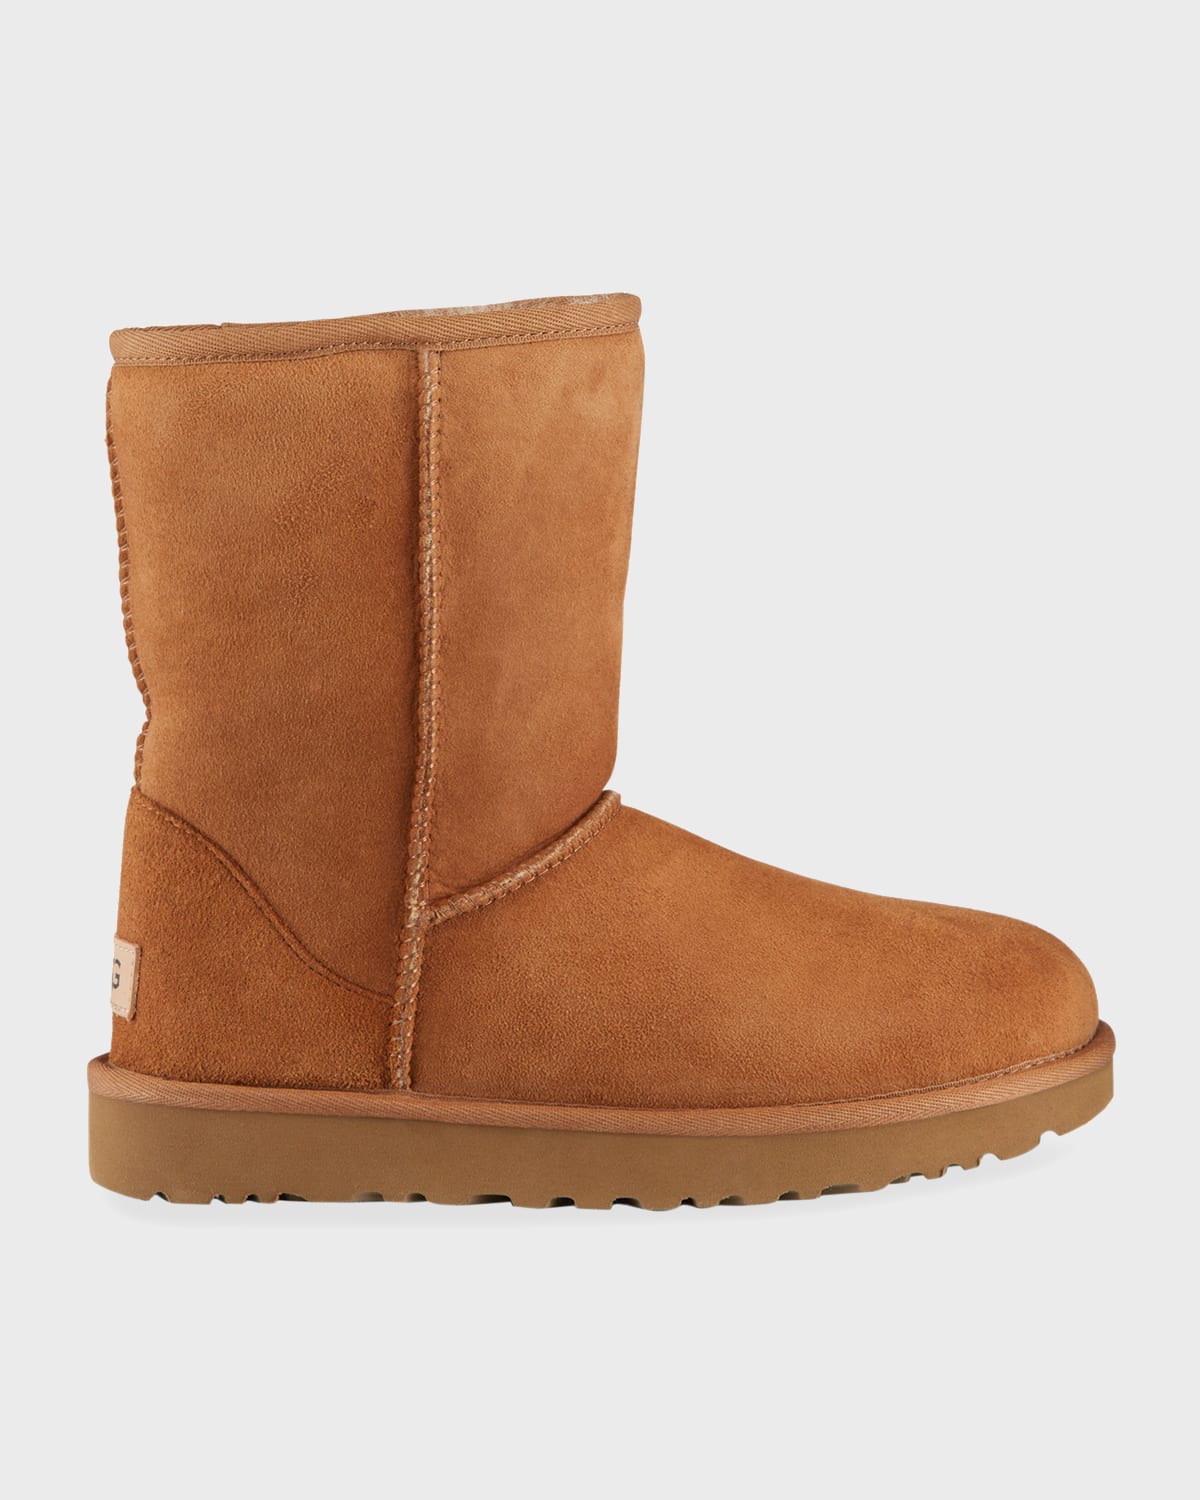 Shop Ugg Classic Short Ii Boots In Chestnut